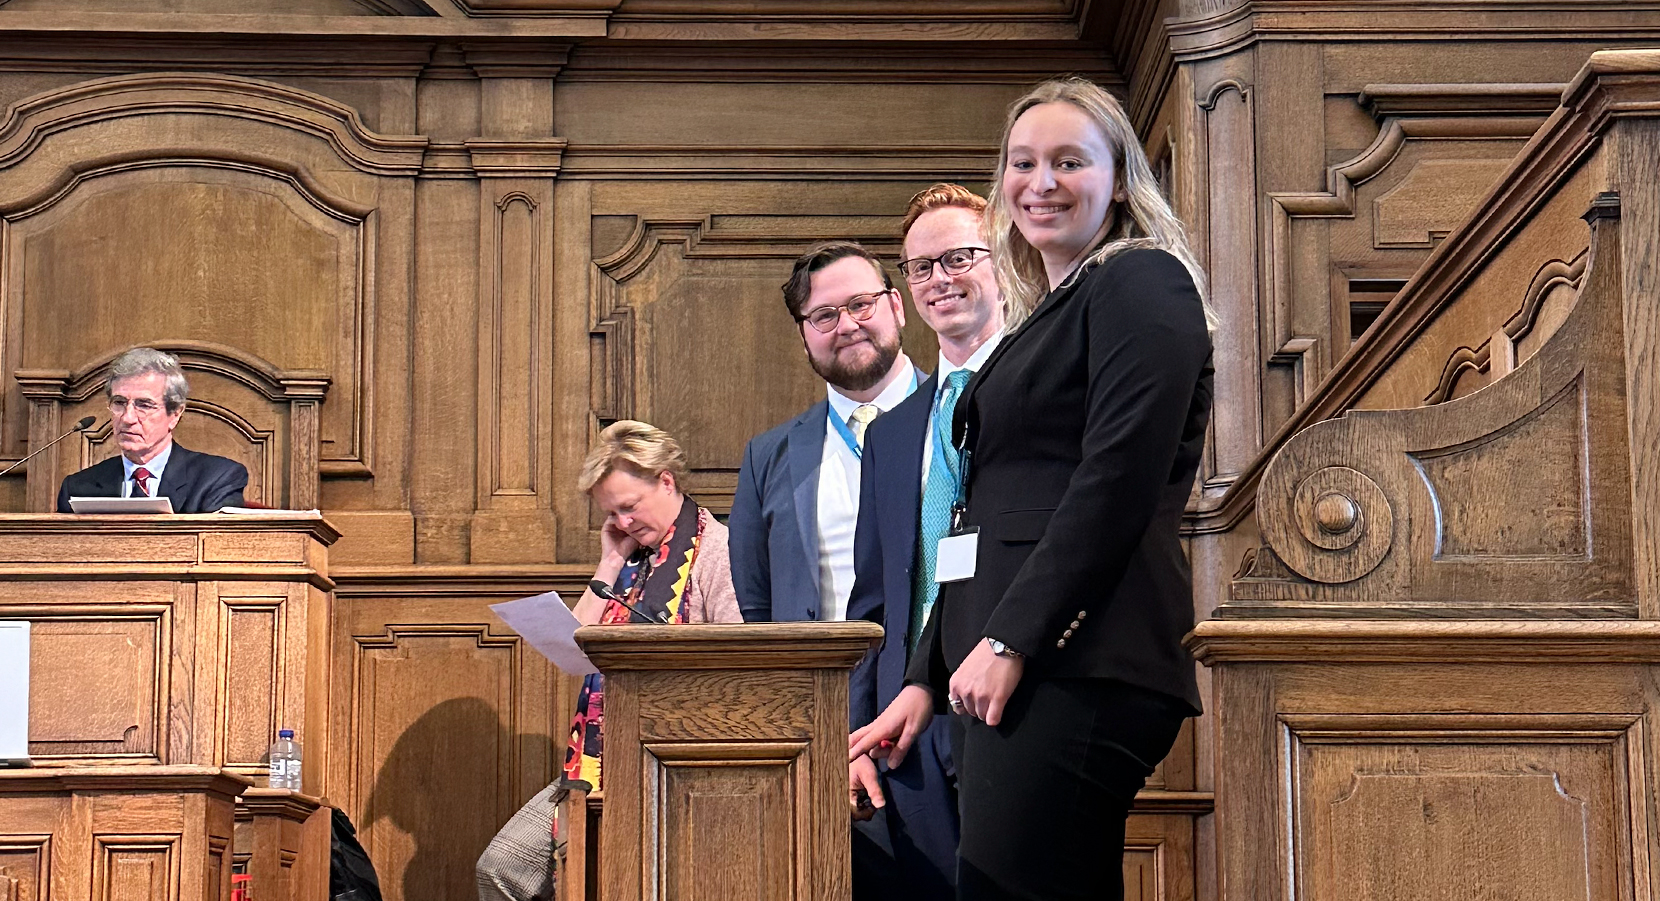 International and European Tax Moot Court competition team